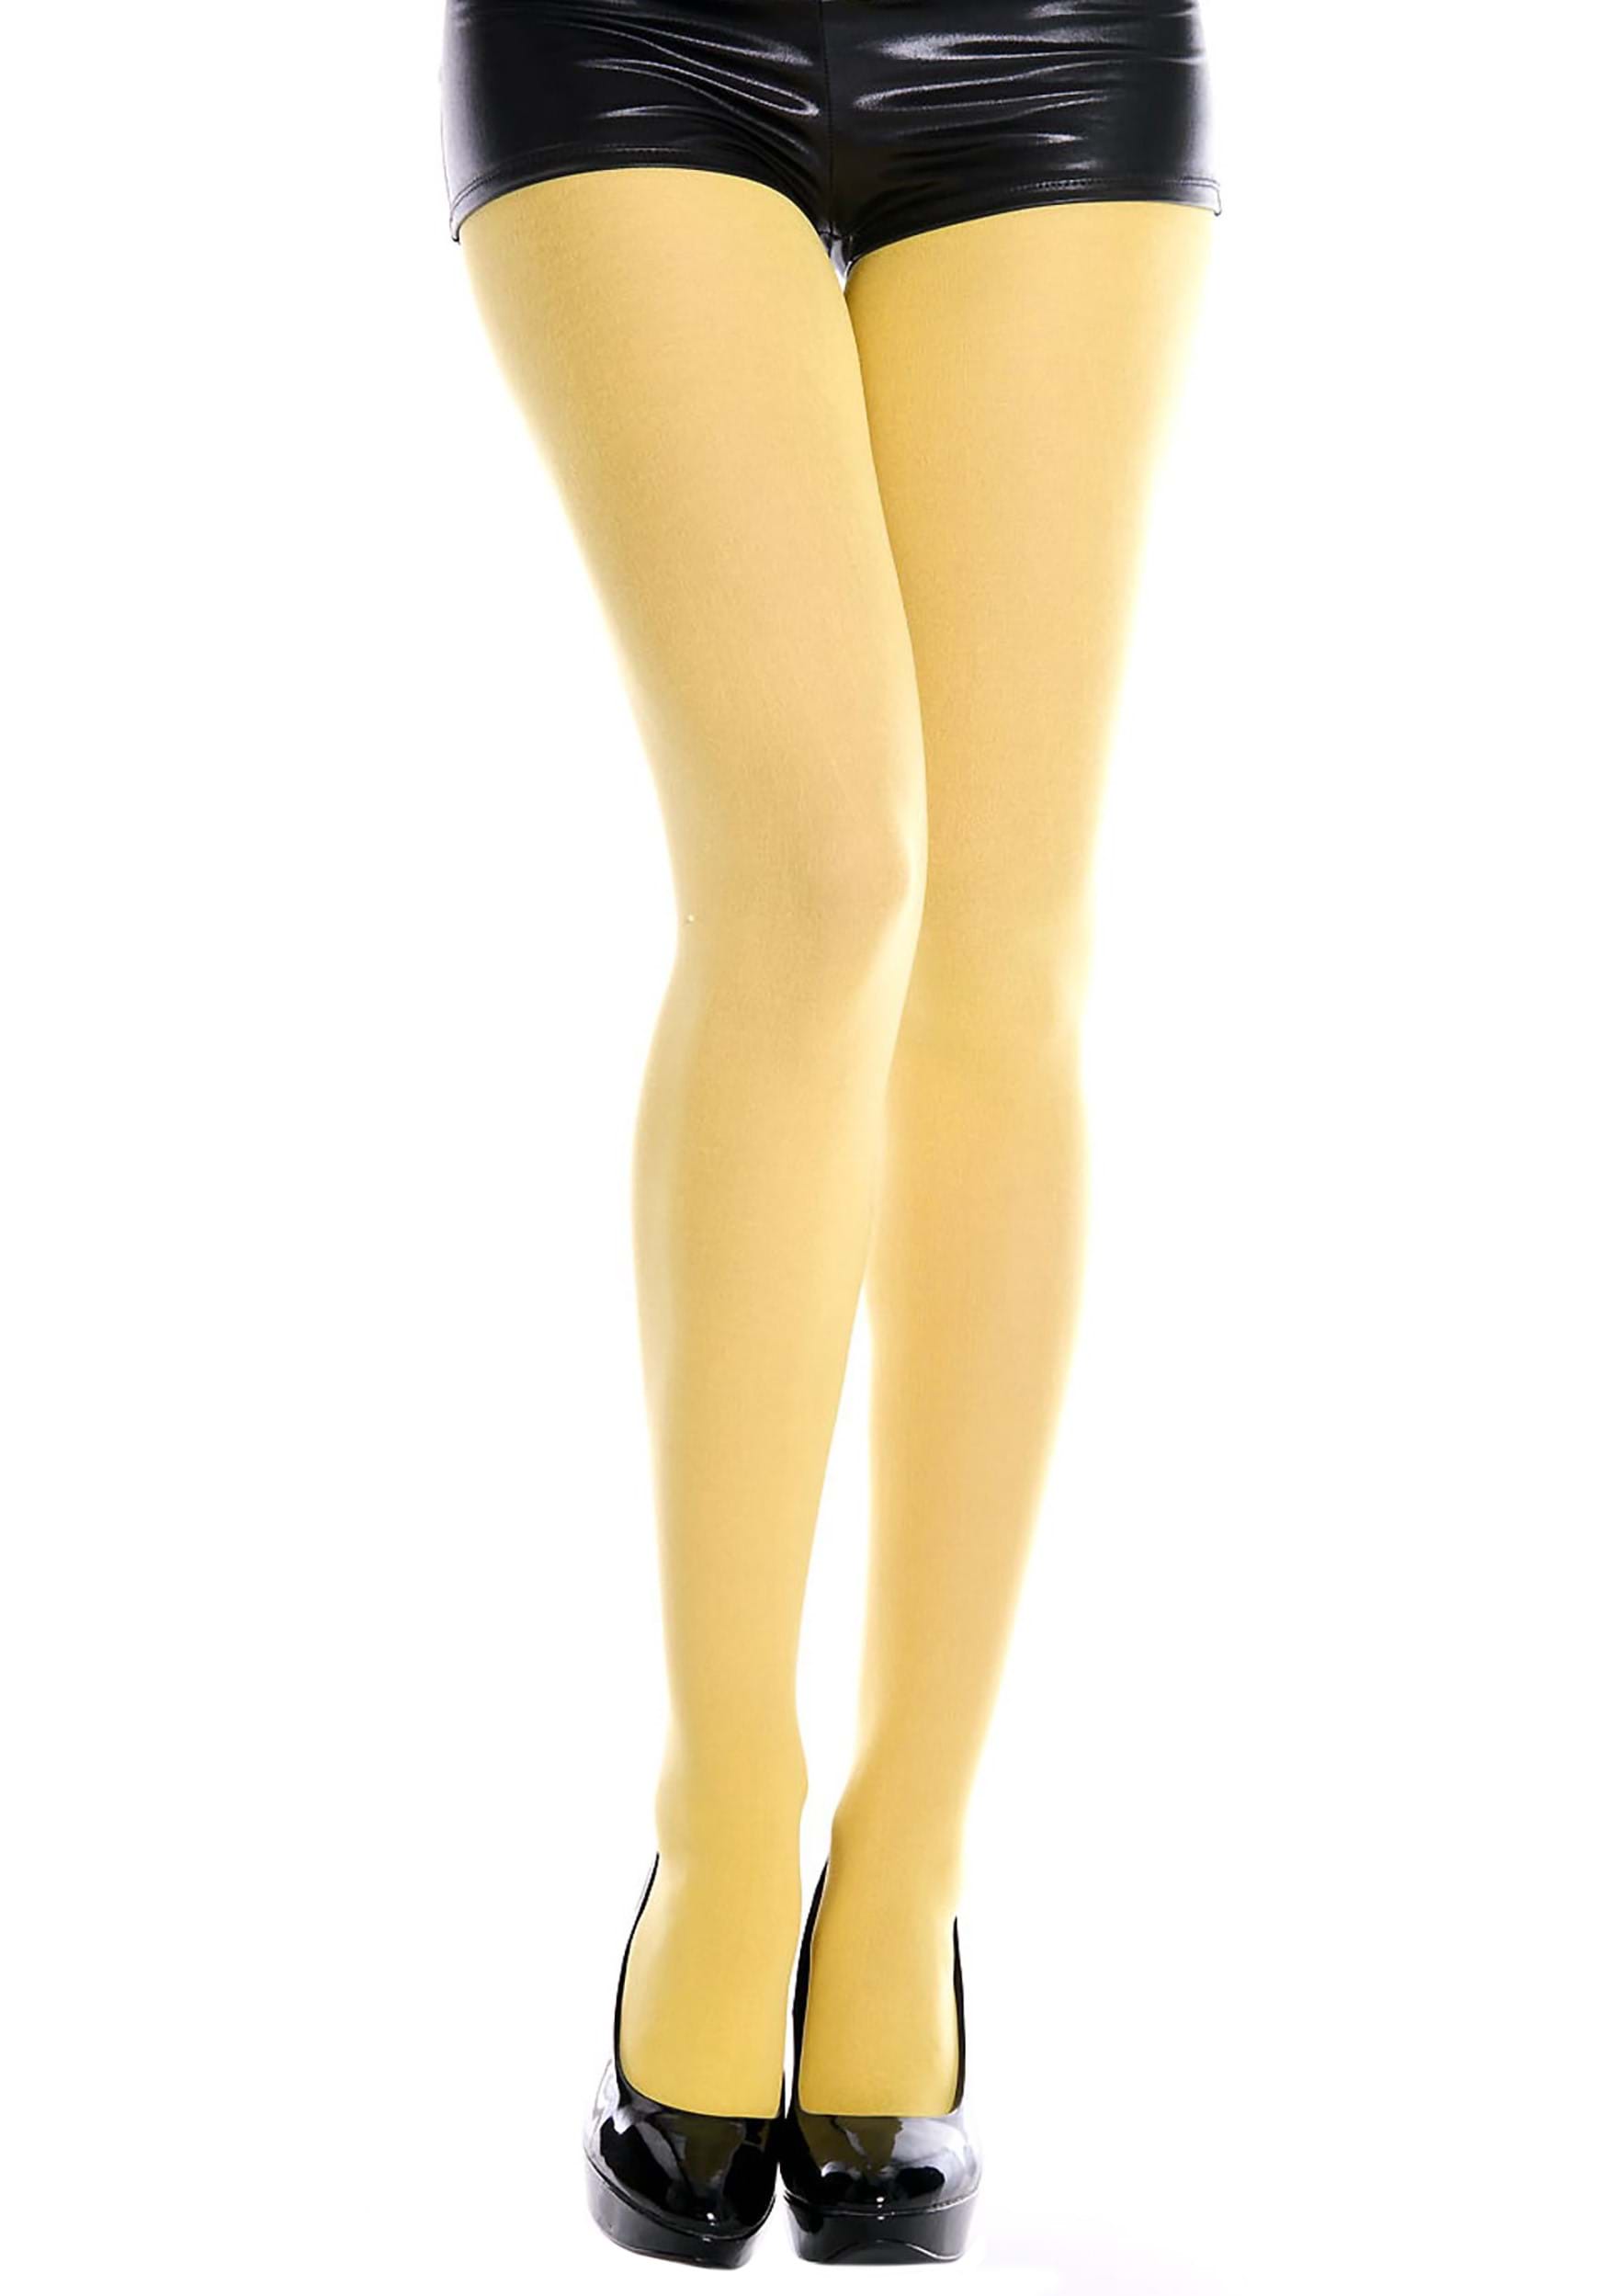 Yellow tights  Yellow tights, Colored tights outfit, Pantyhose